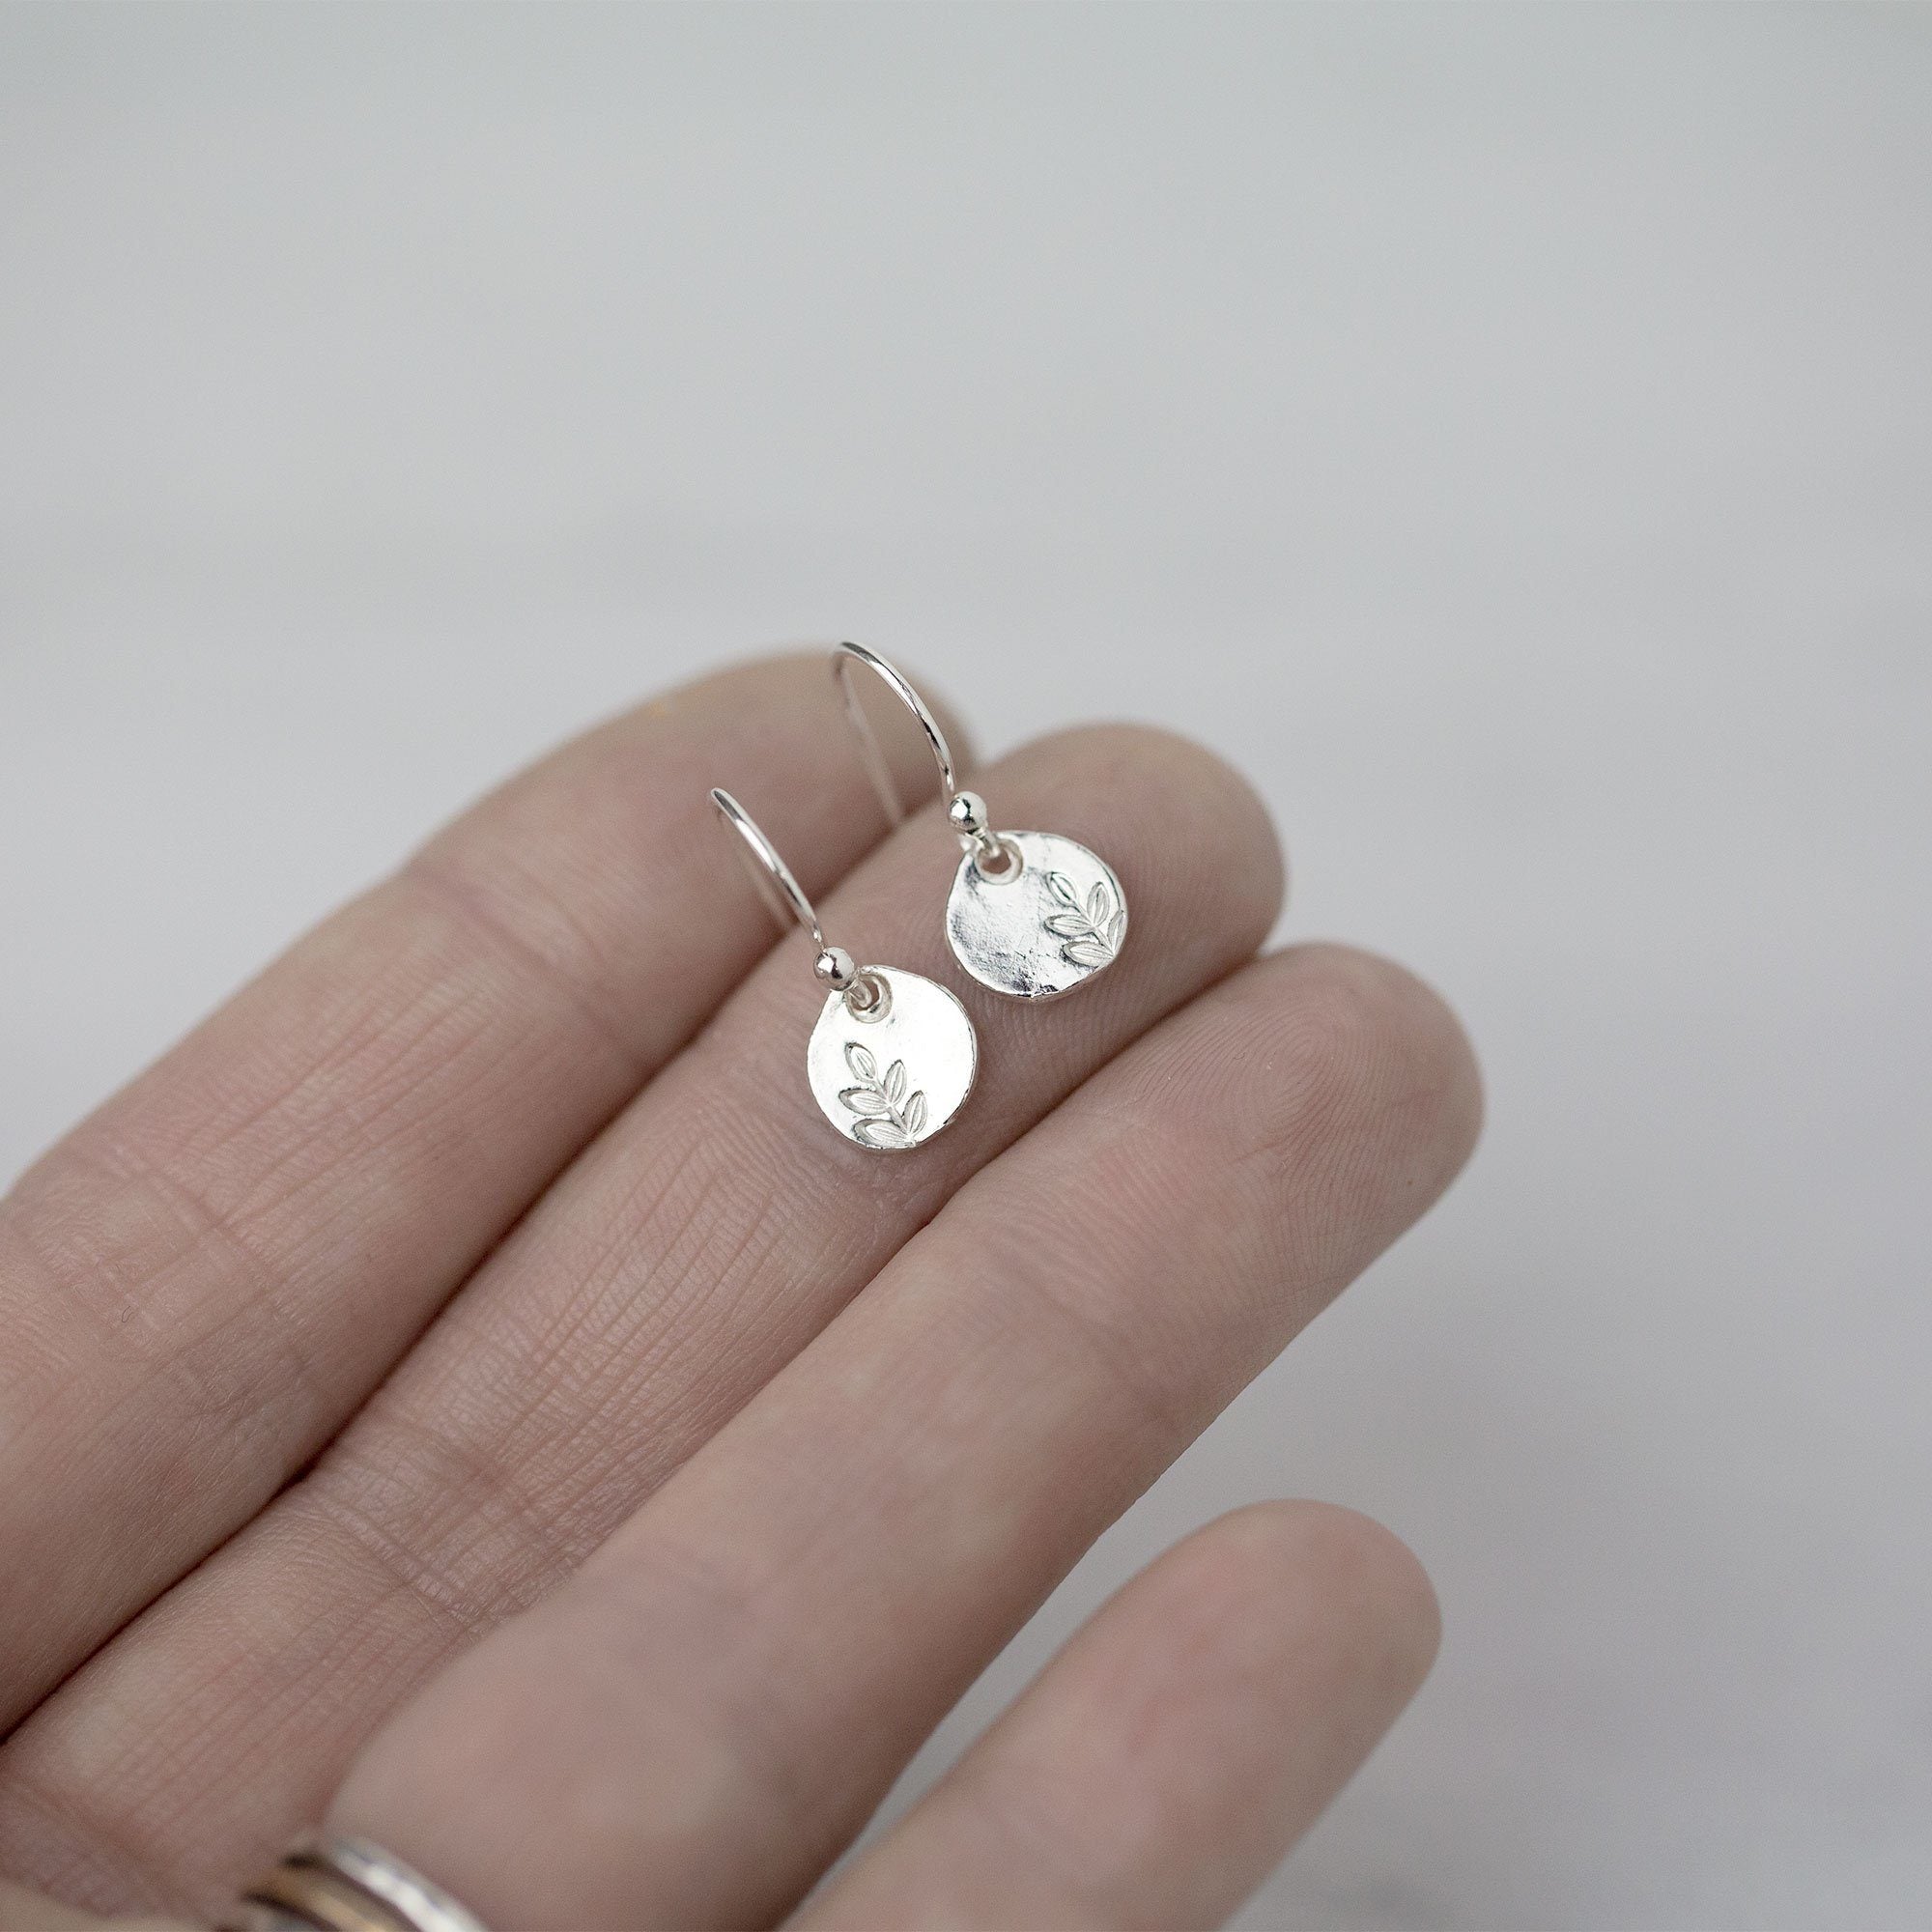 Tiny Stamped Leaf Earrings - Handmade Jewelry by Burnish